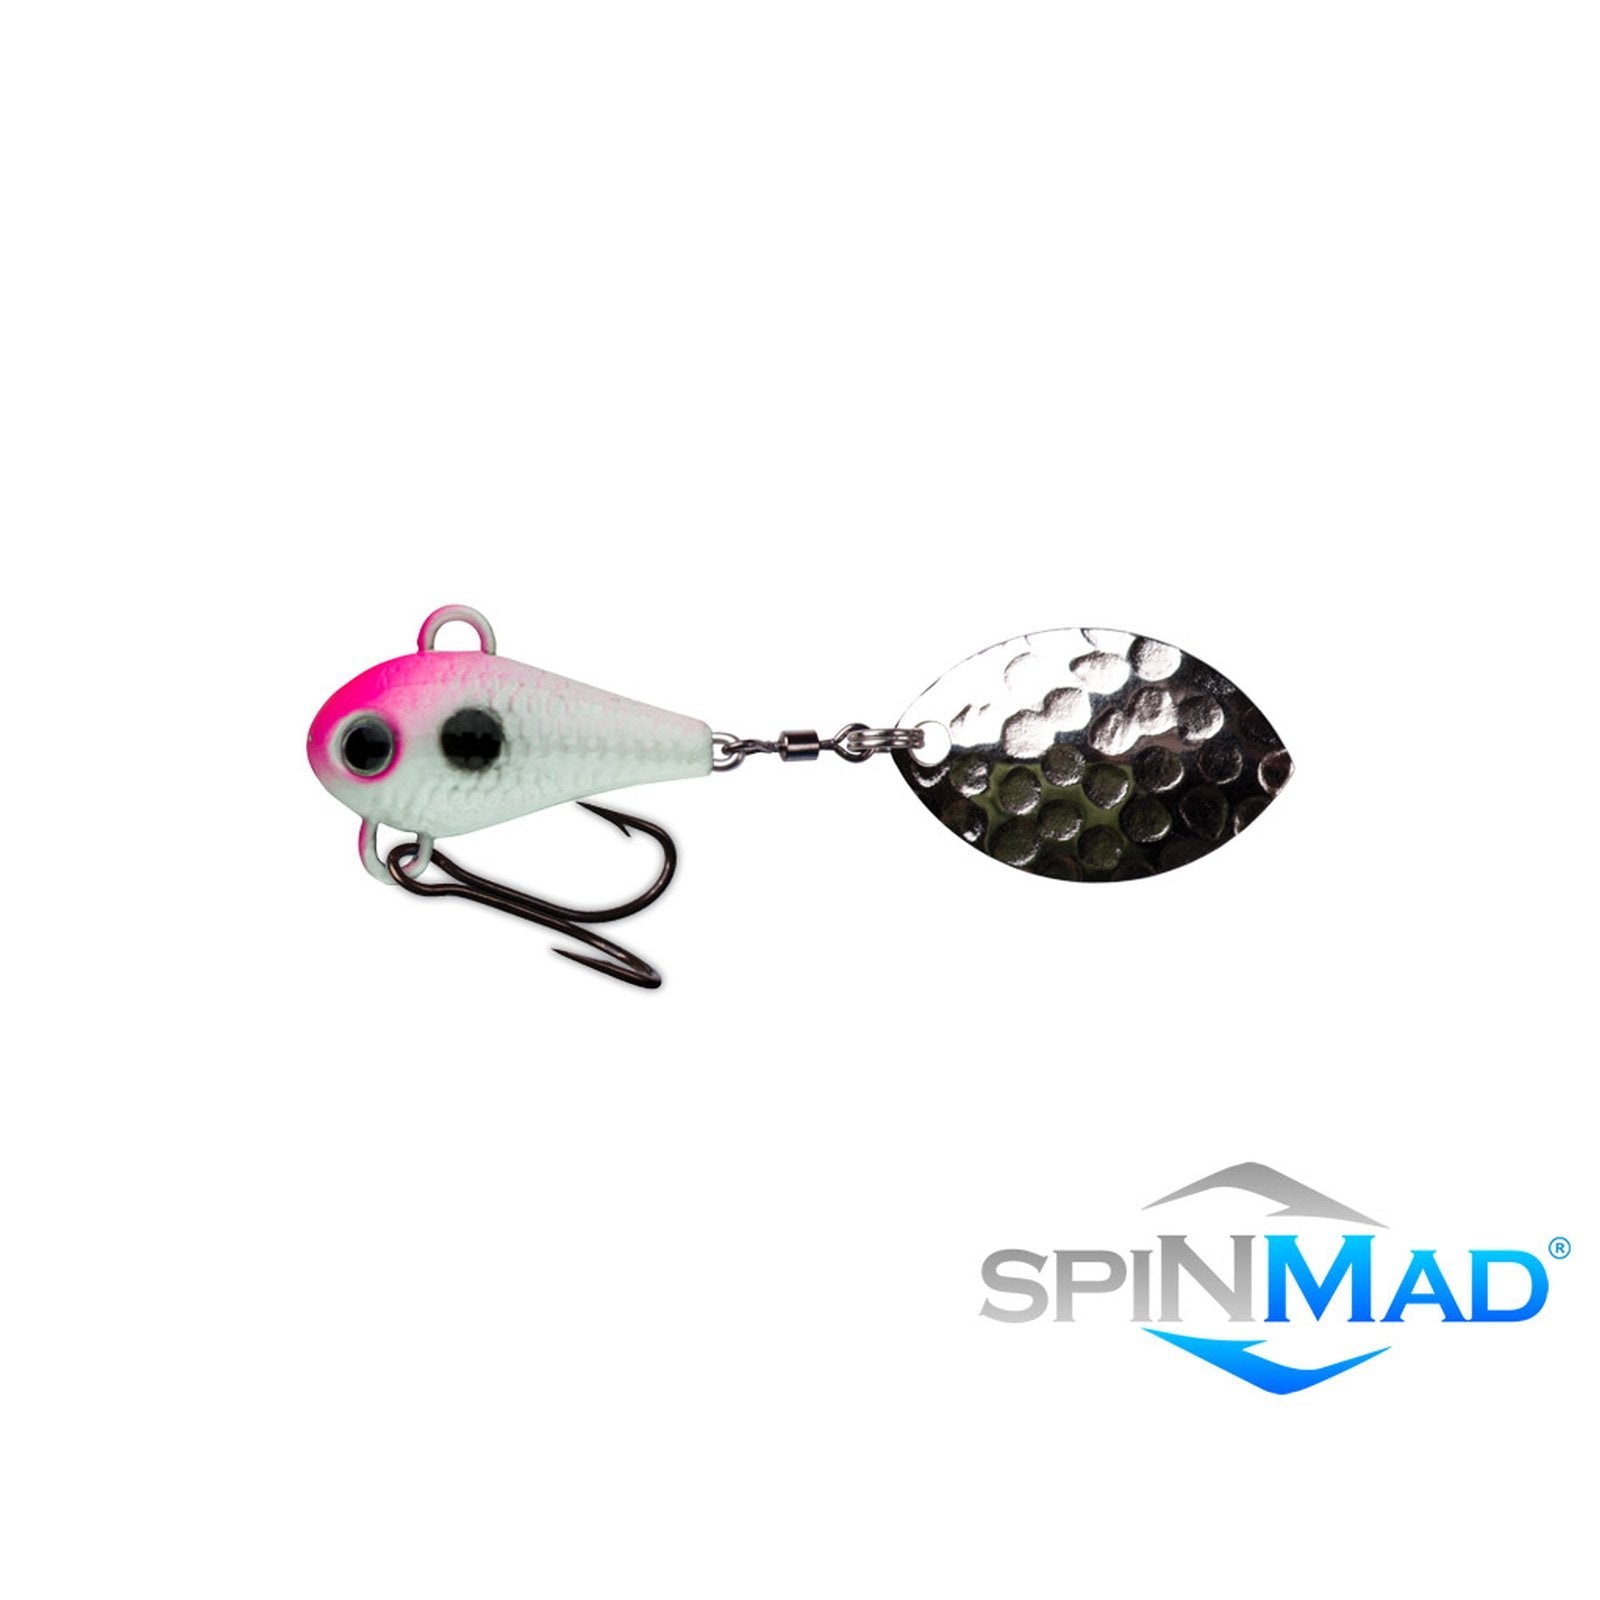 SpinMad MAG 6 0713